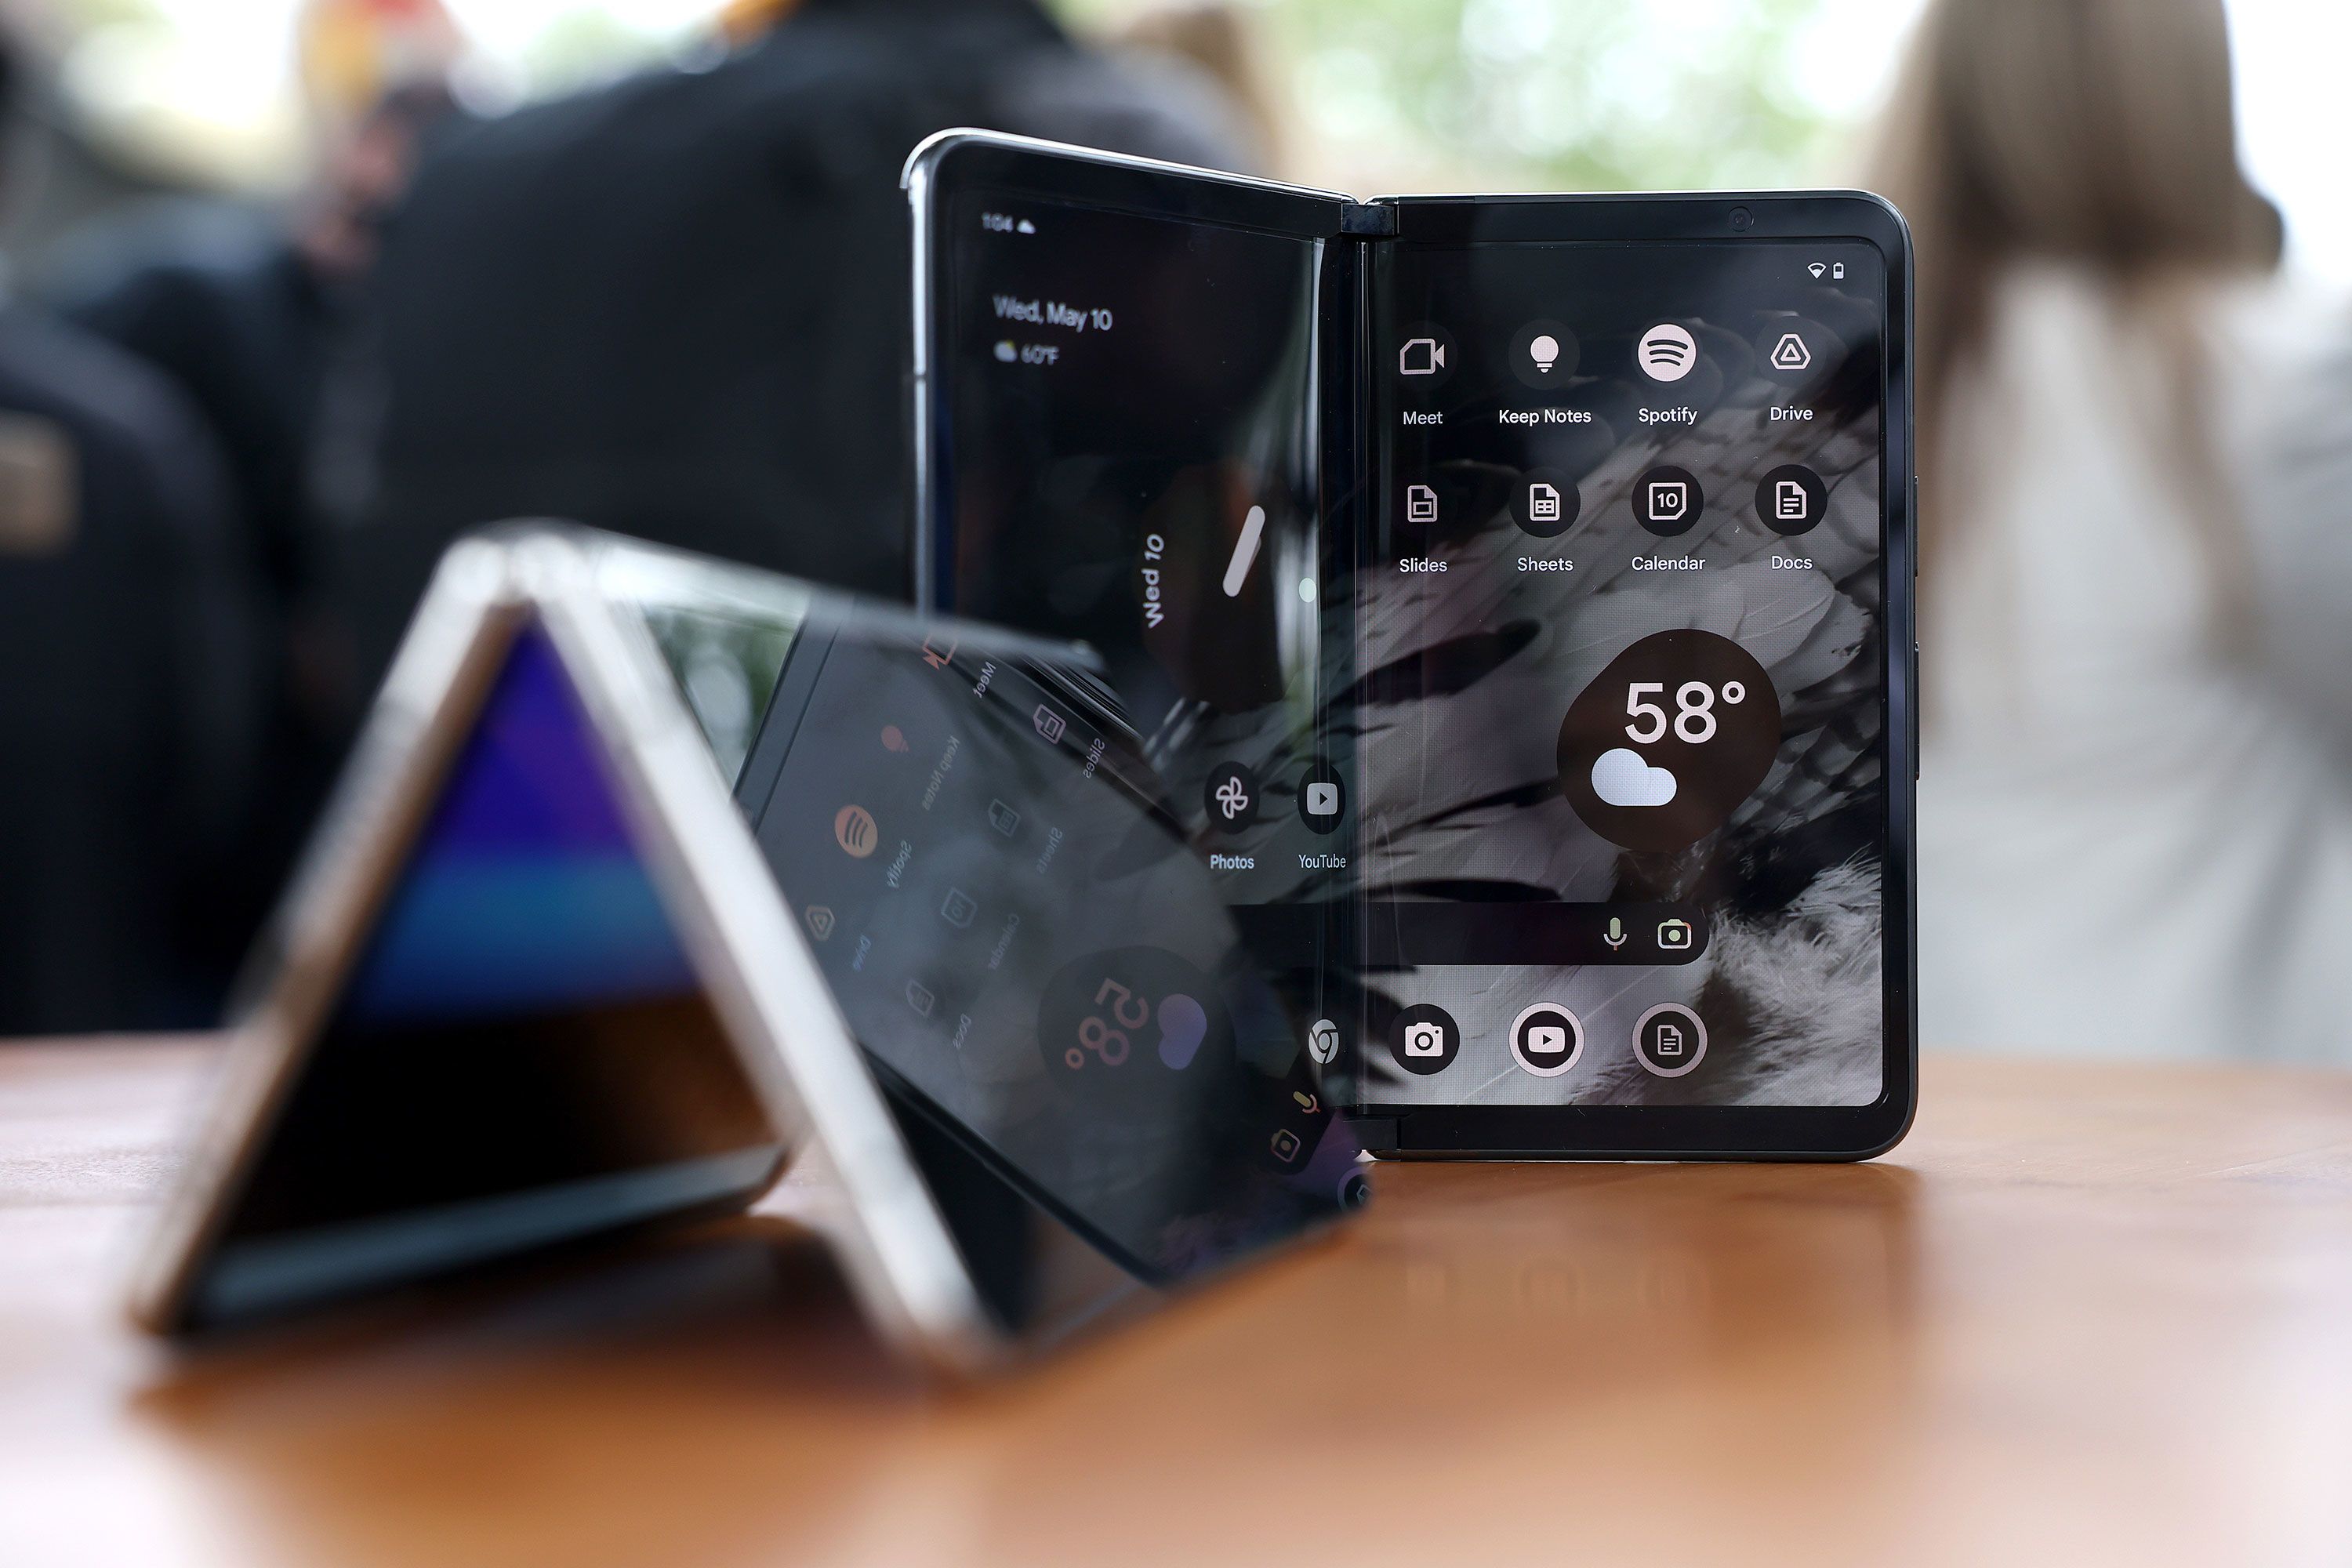 Everyone wants a foldable phone, but most of us can't afford one